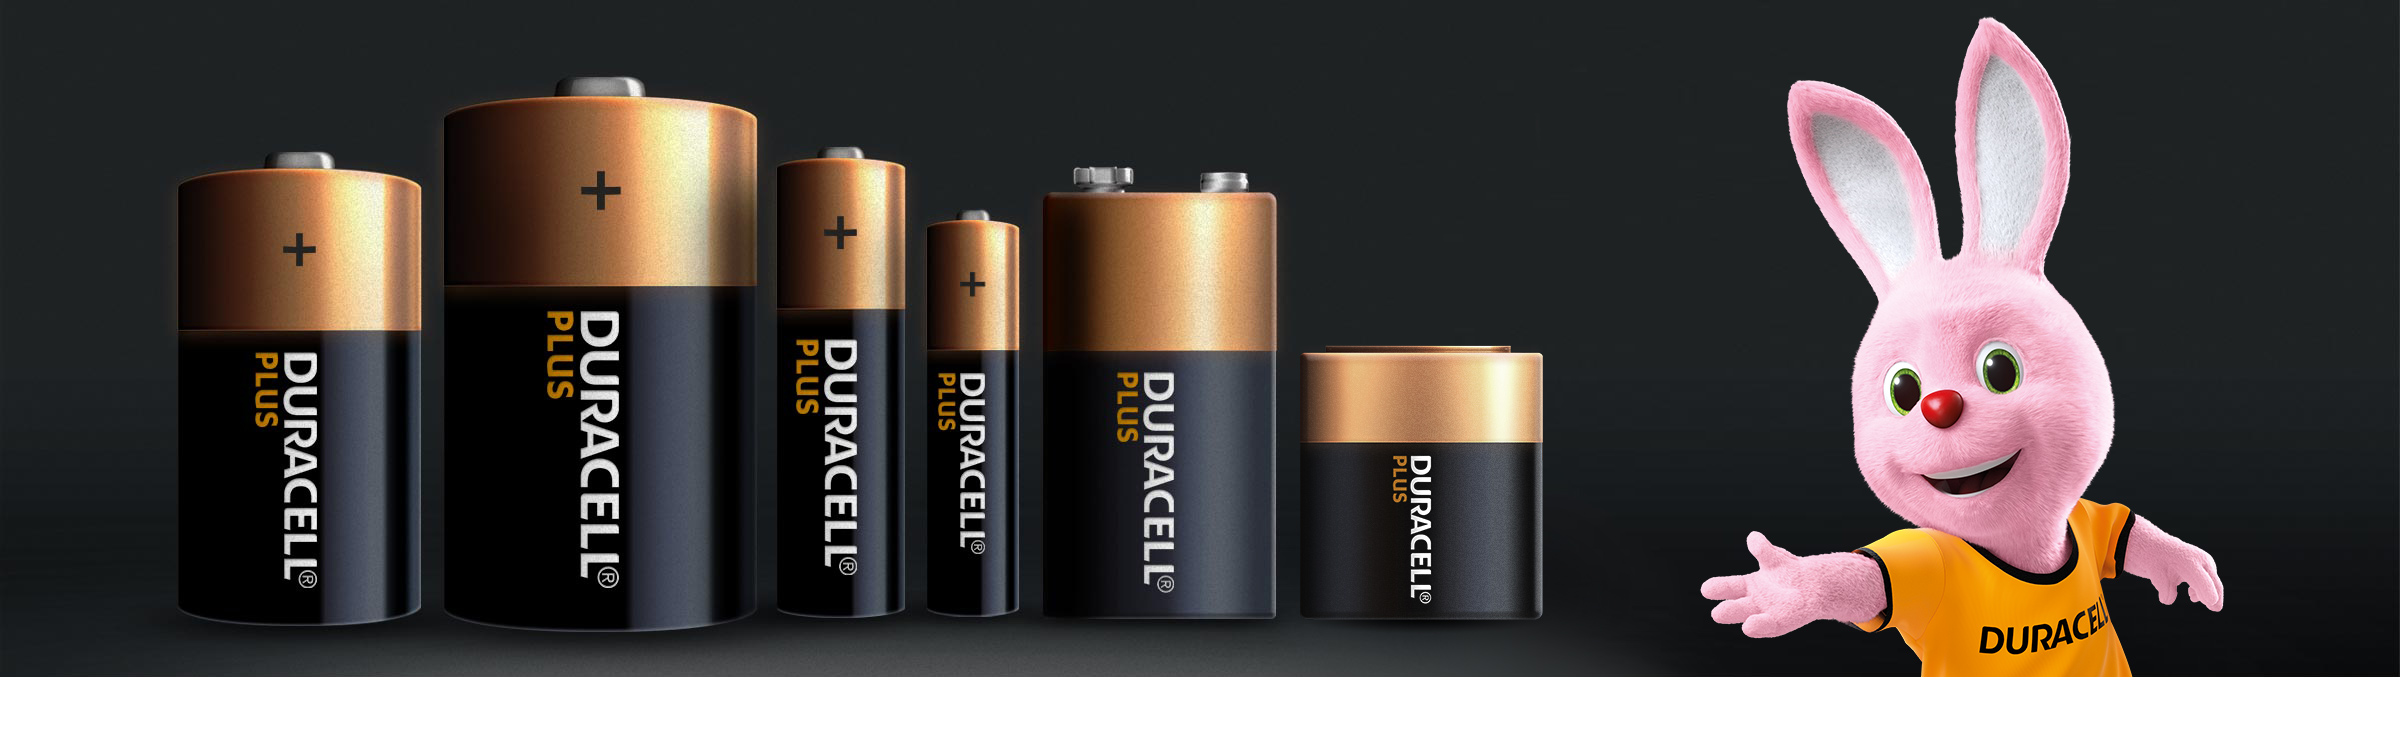 Duracell Plus AAA Batteries (12 Pack) - Alkaline 1.5V - Up To 100% Extra  Life - Reliability For Everyday Devices - 0% Plastic Packaging - 9 Year